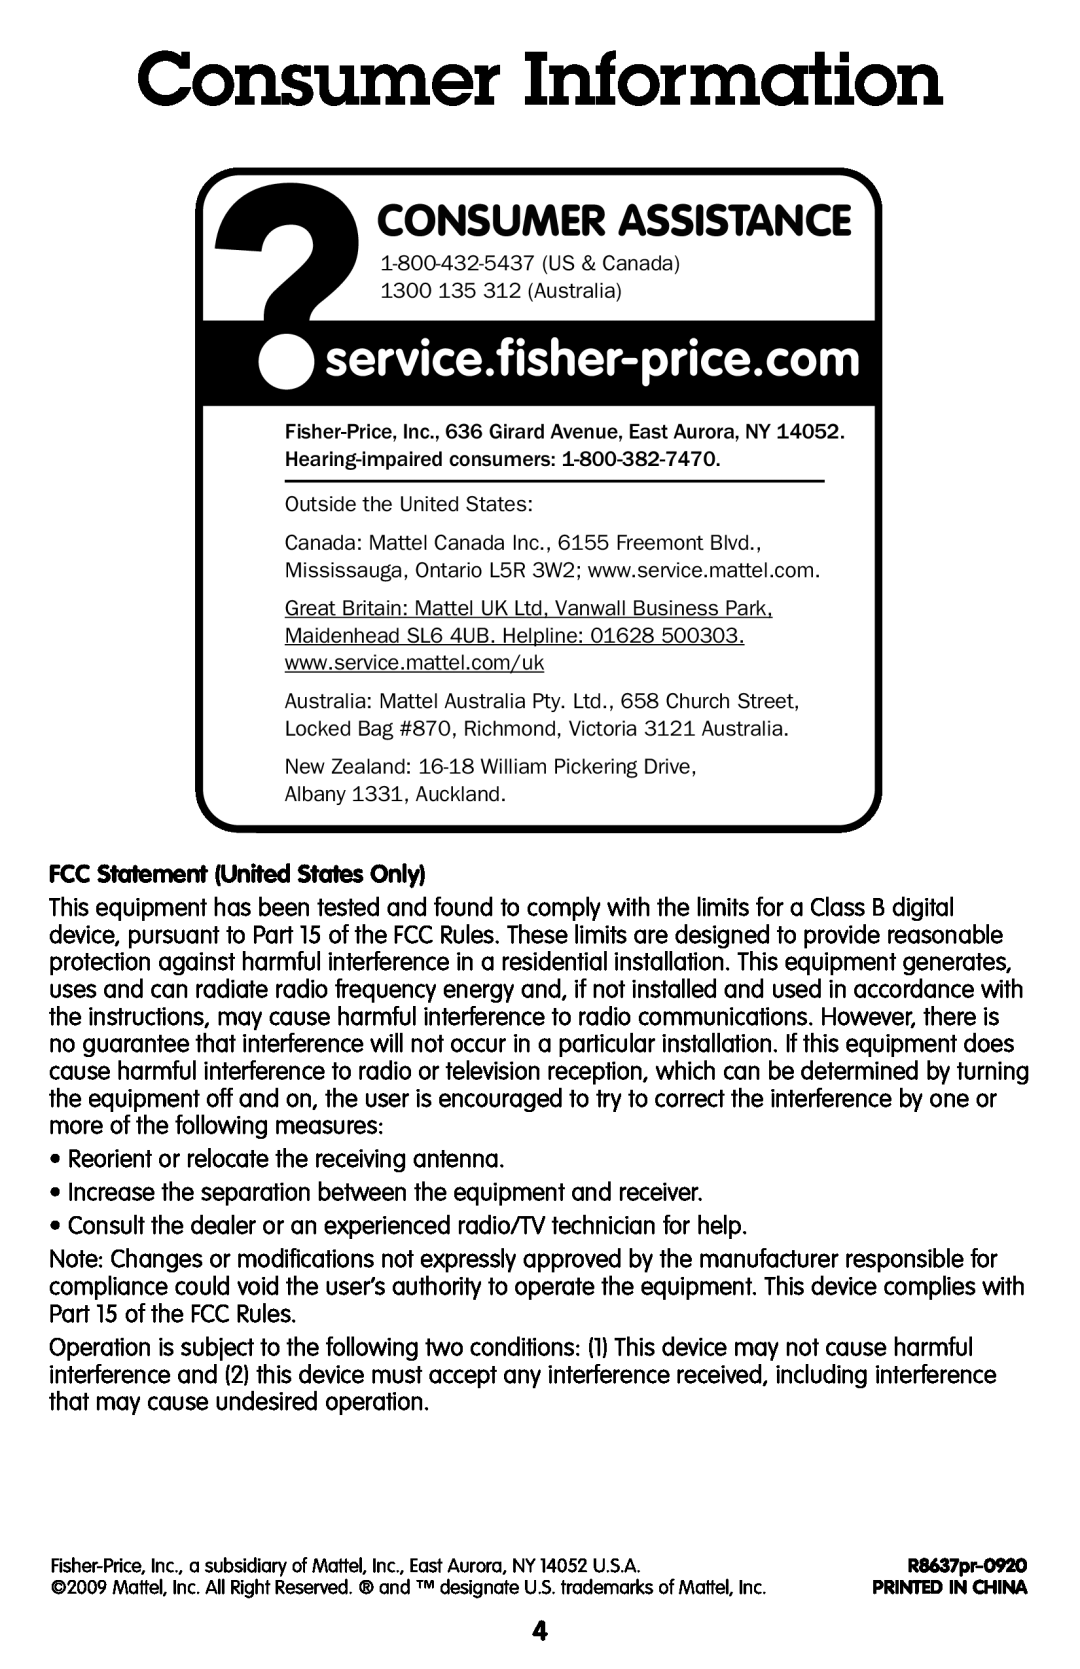 Fisher-Price R8637 instruction sheet Consumer Information, FCC Statement United States Only, Consumer Assistance 